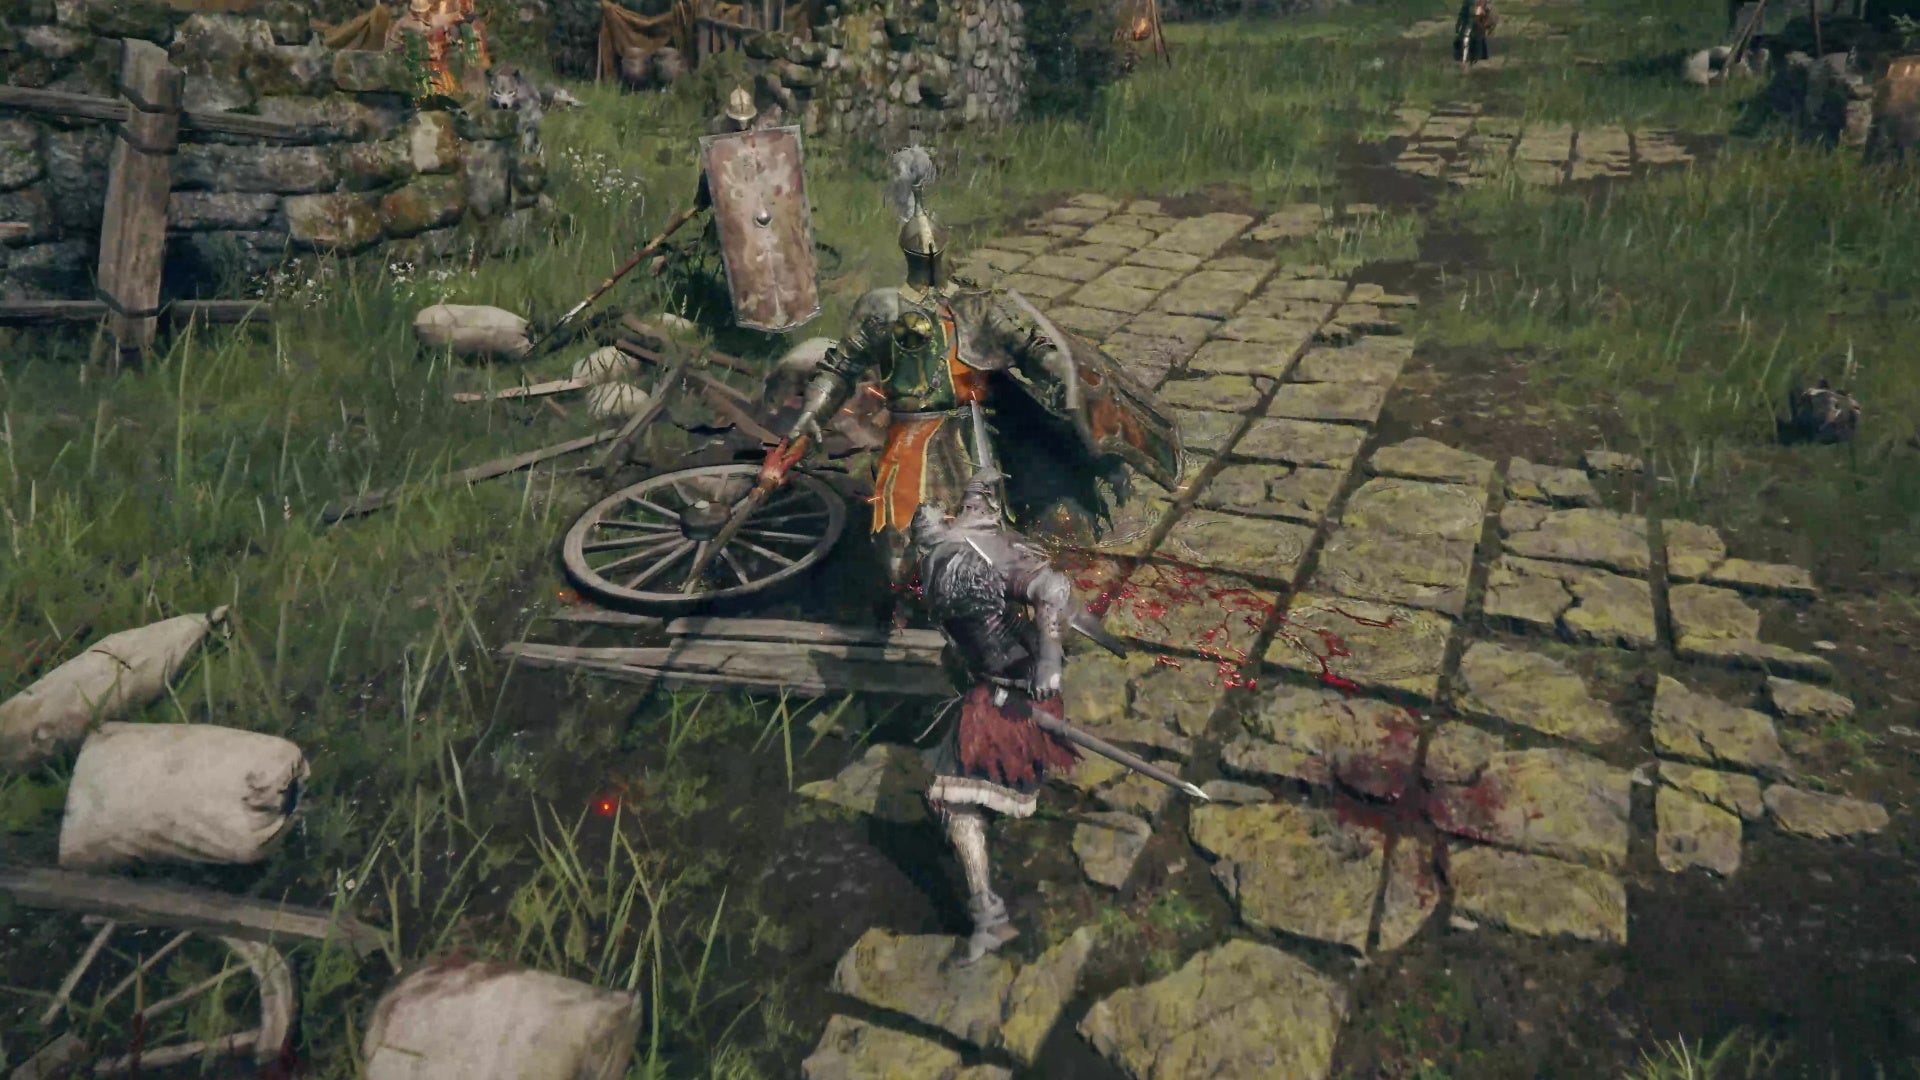 The player stabs an undead with a big sword in Elden Ring.